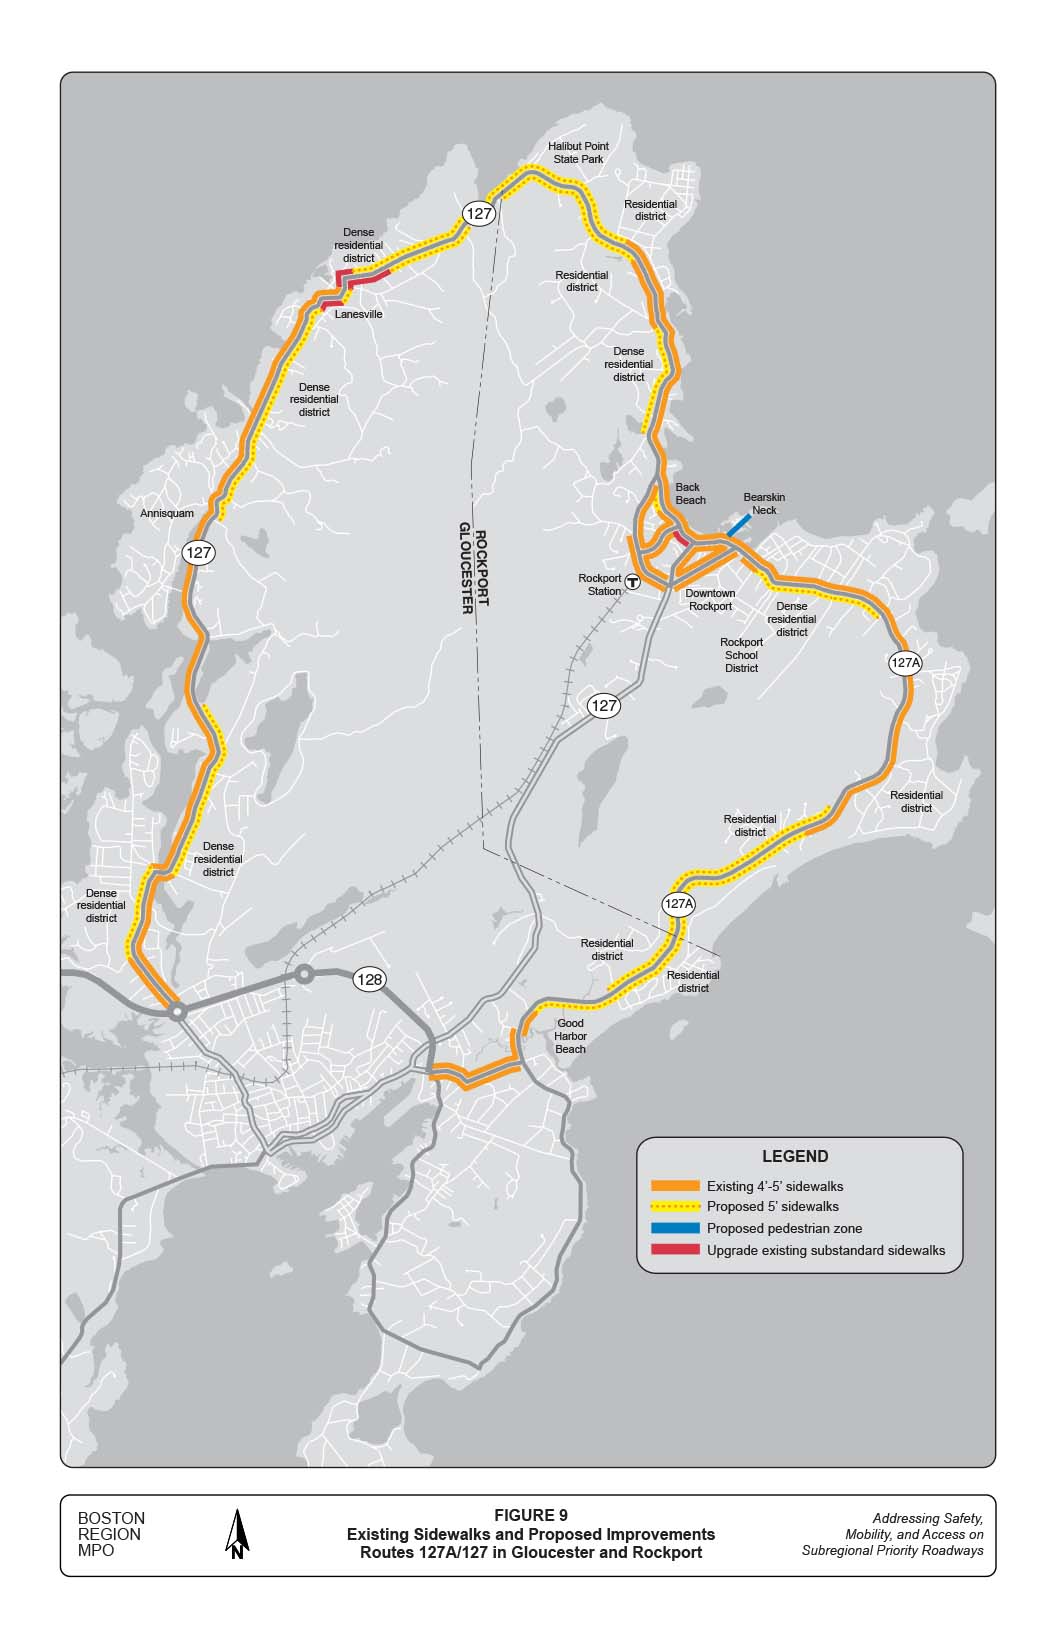 FIGURE 9. Existing Sidewalks and Proposed Improvements Routes 127A/127 in Gloucester and Rockport
Figure 9 is a black-and-white map with superimposed colors that denote the following: Orange line = existing 4’-5’ sidewalks; yellow highlight with red dots = proposed 5’ sidewalks; blue line = proposed pedestrian zone; and red line = upgrade existing substandard sidewalks.
